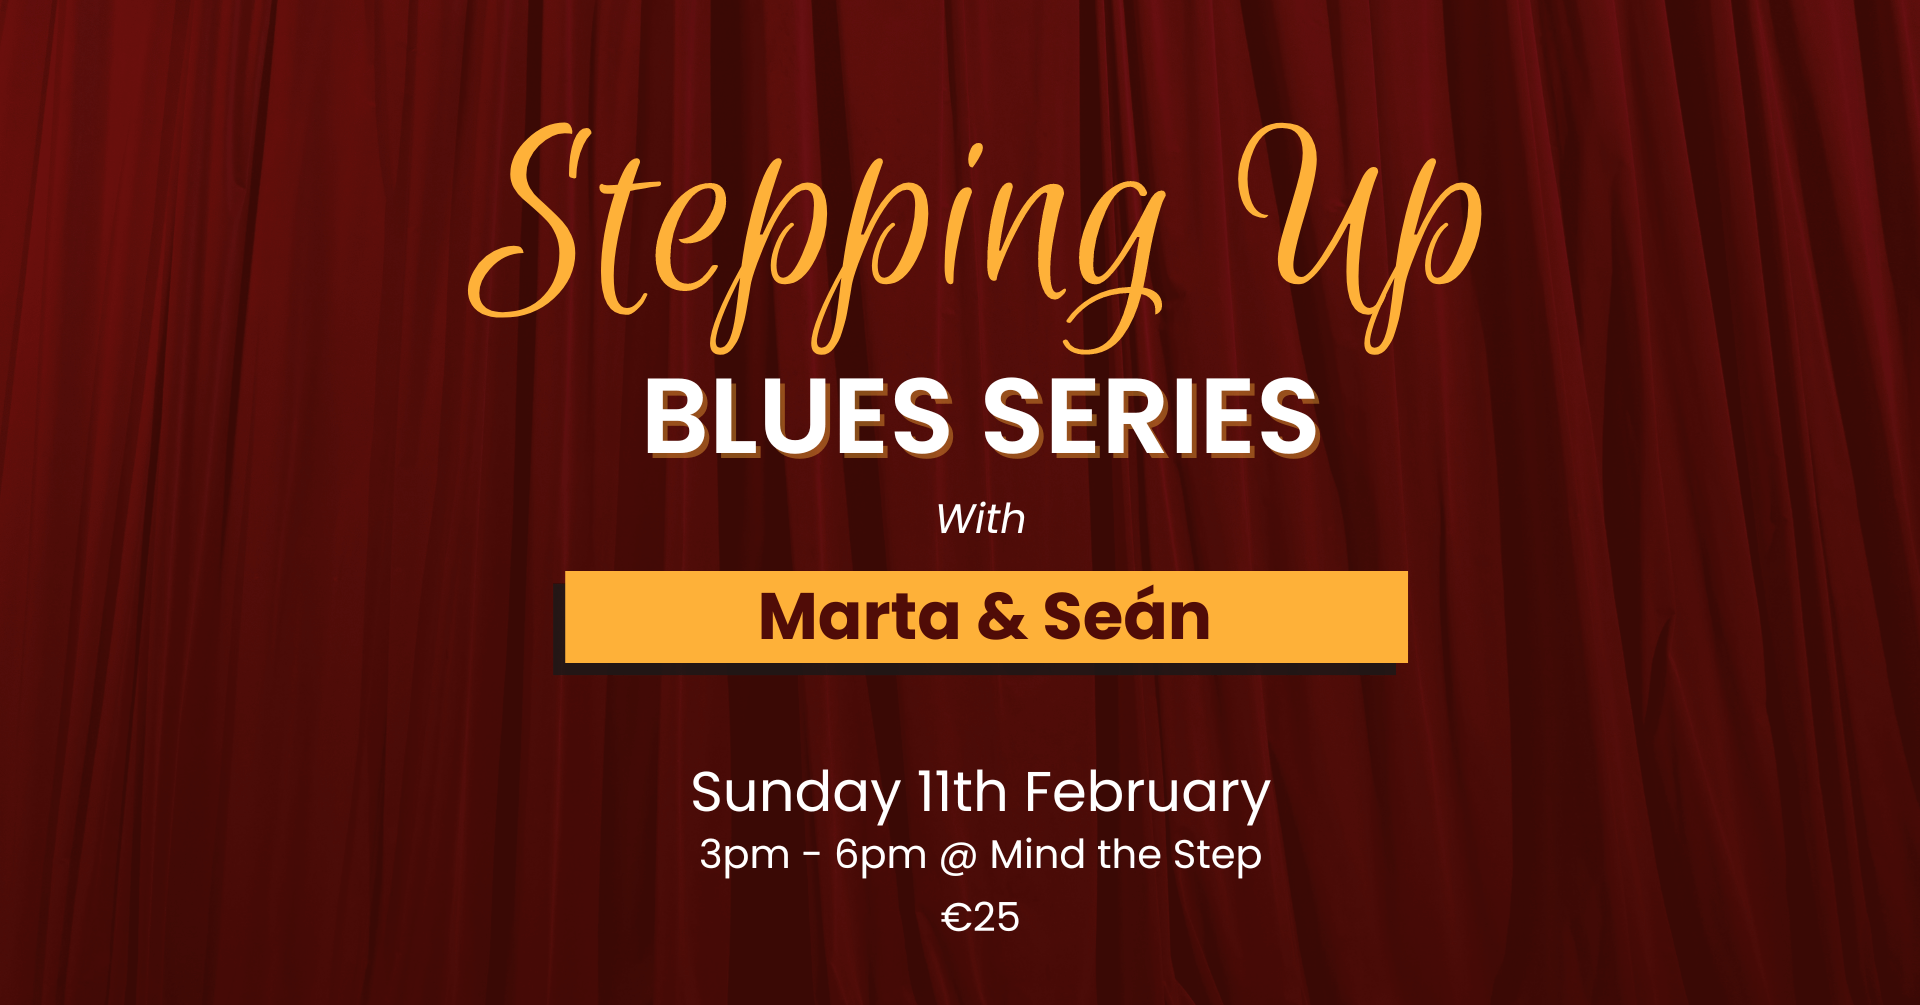 Stepping Up Blues Series with Marta & Seán